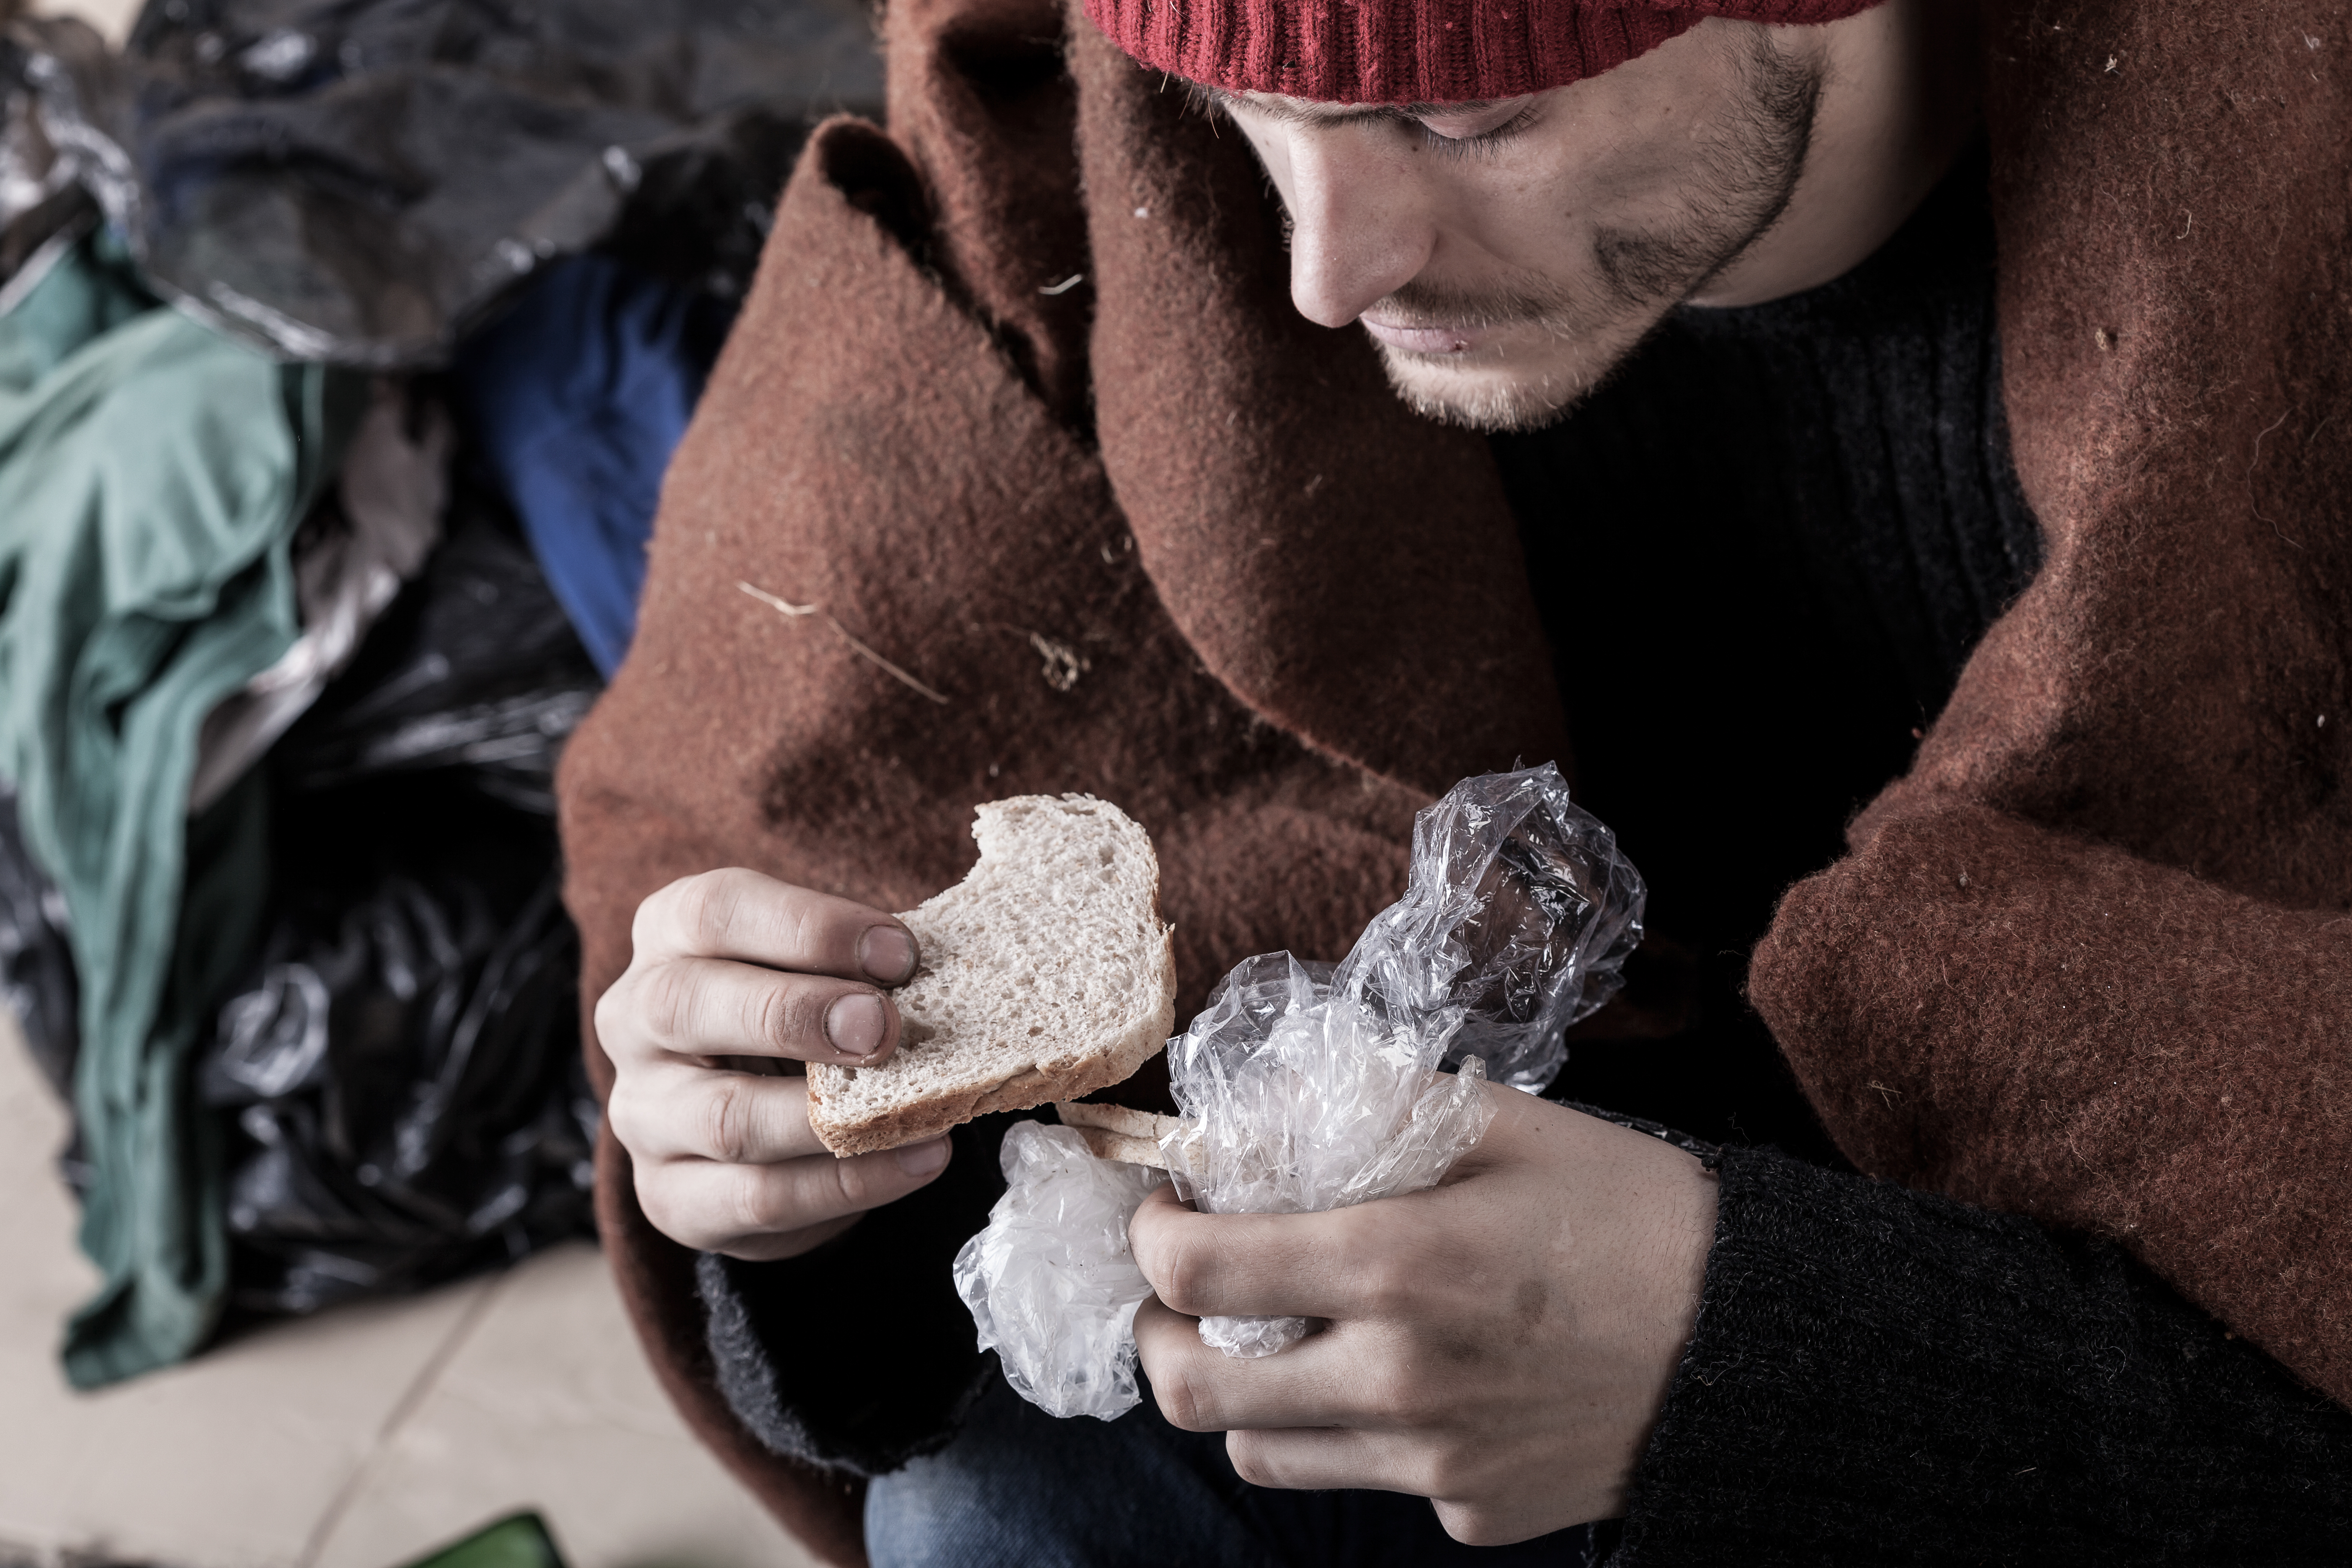 Poor man eating sandwich on the street.